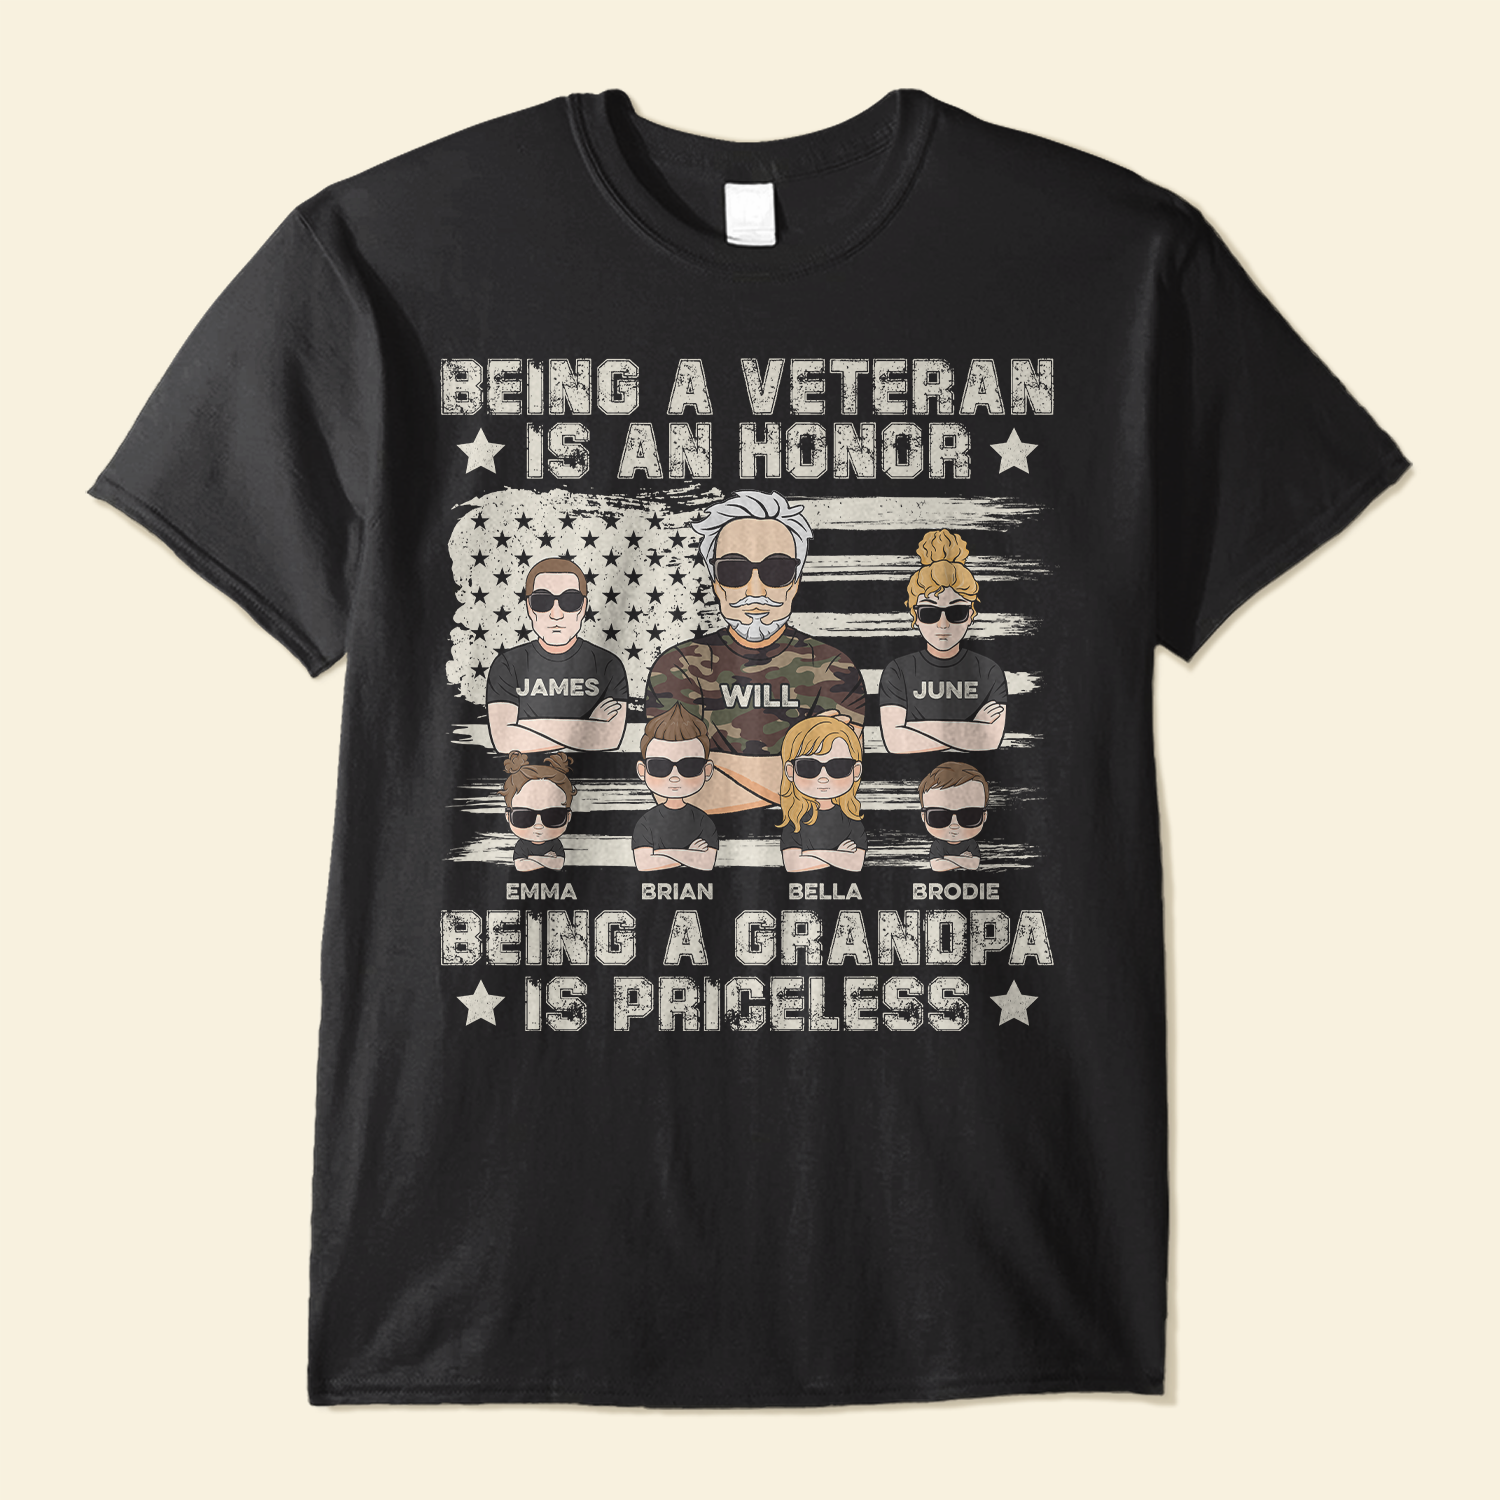 Image of Being A Grandpa Is Priceless - Personalized Shirt - Father's Day, Birthday Gift For Veteran, Army Dad, Grandpa, Grandfather - From Son, Daughter, Granddaughters, Grandsons